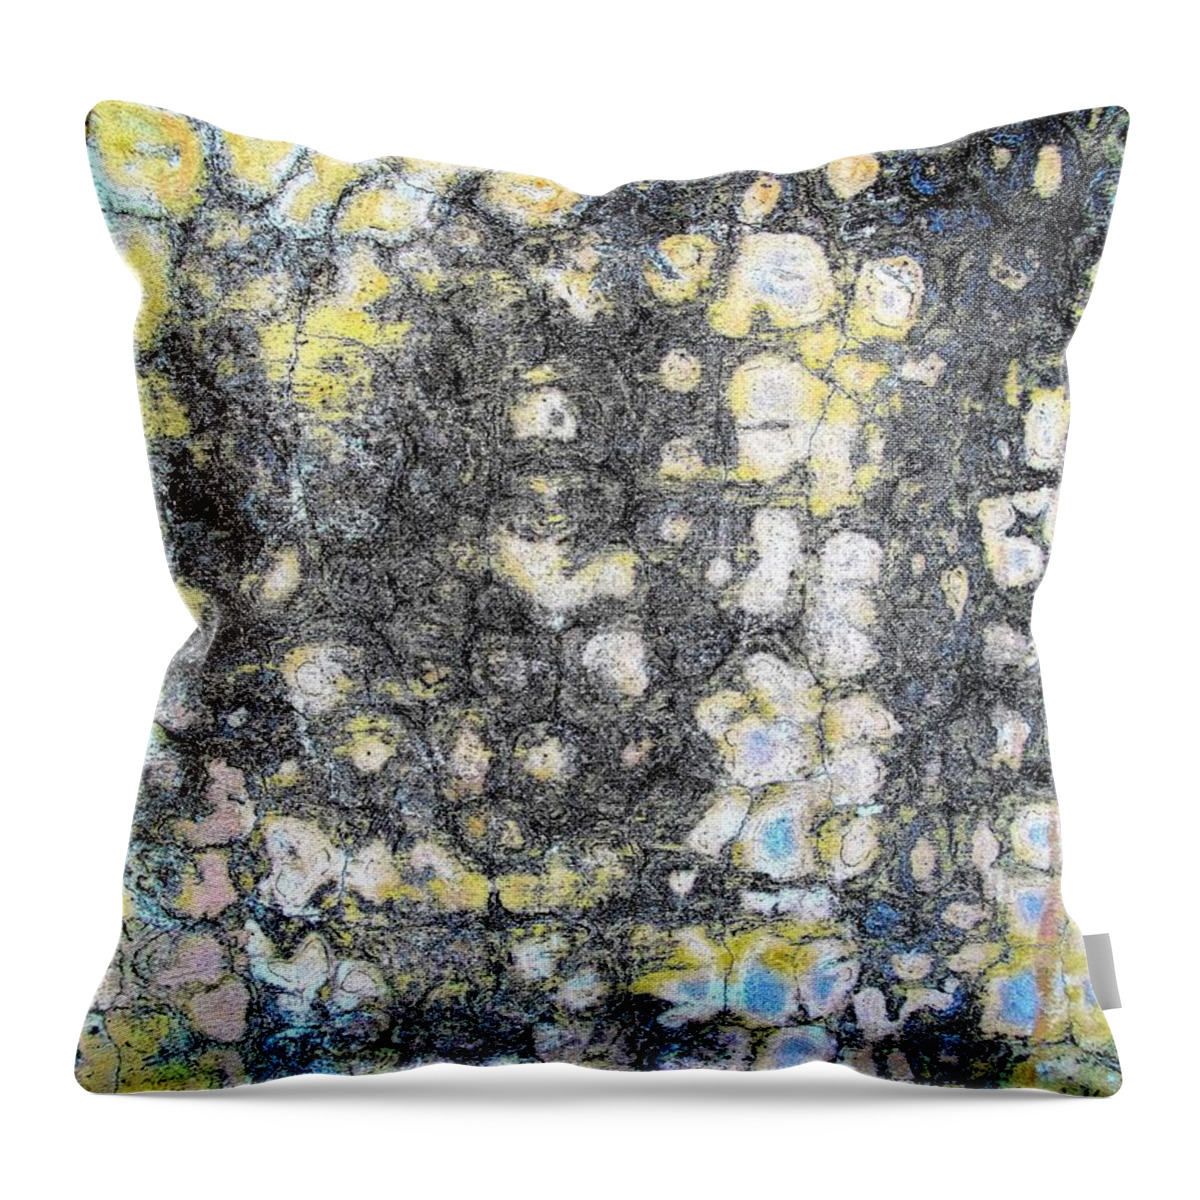 Texture Throw Pillow featuring the photograph Wall Abstract 162 by Maria Huntley